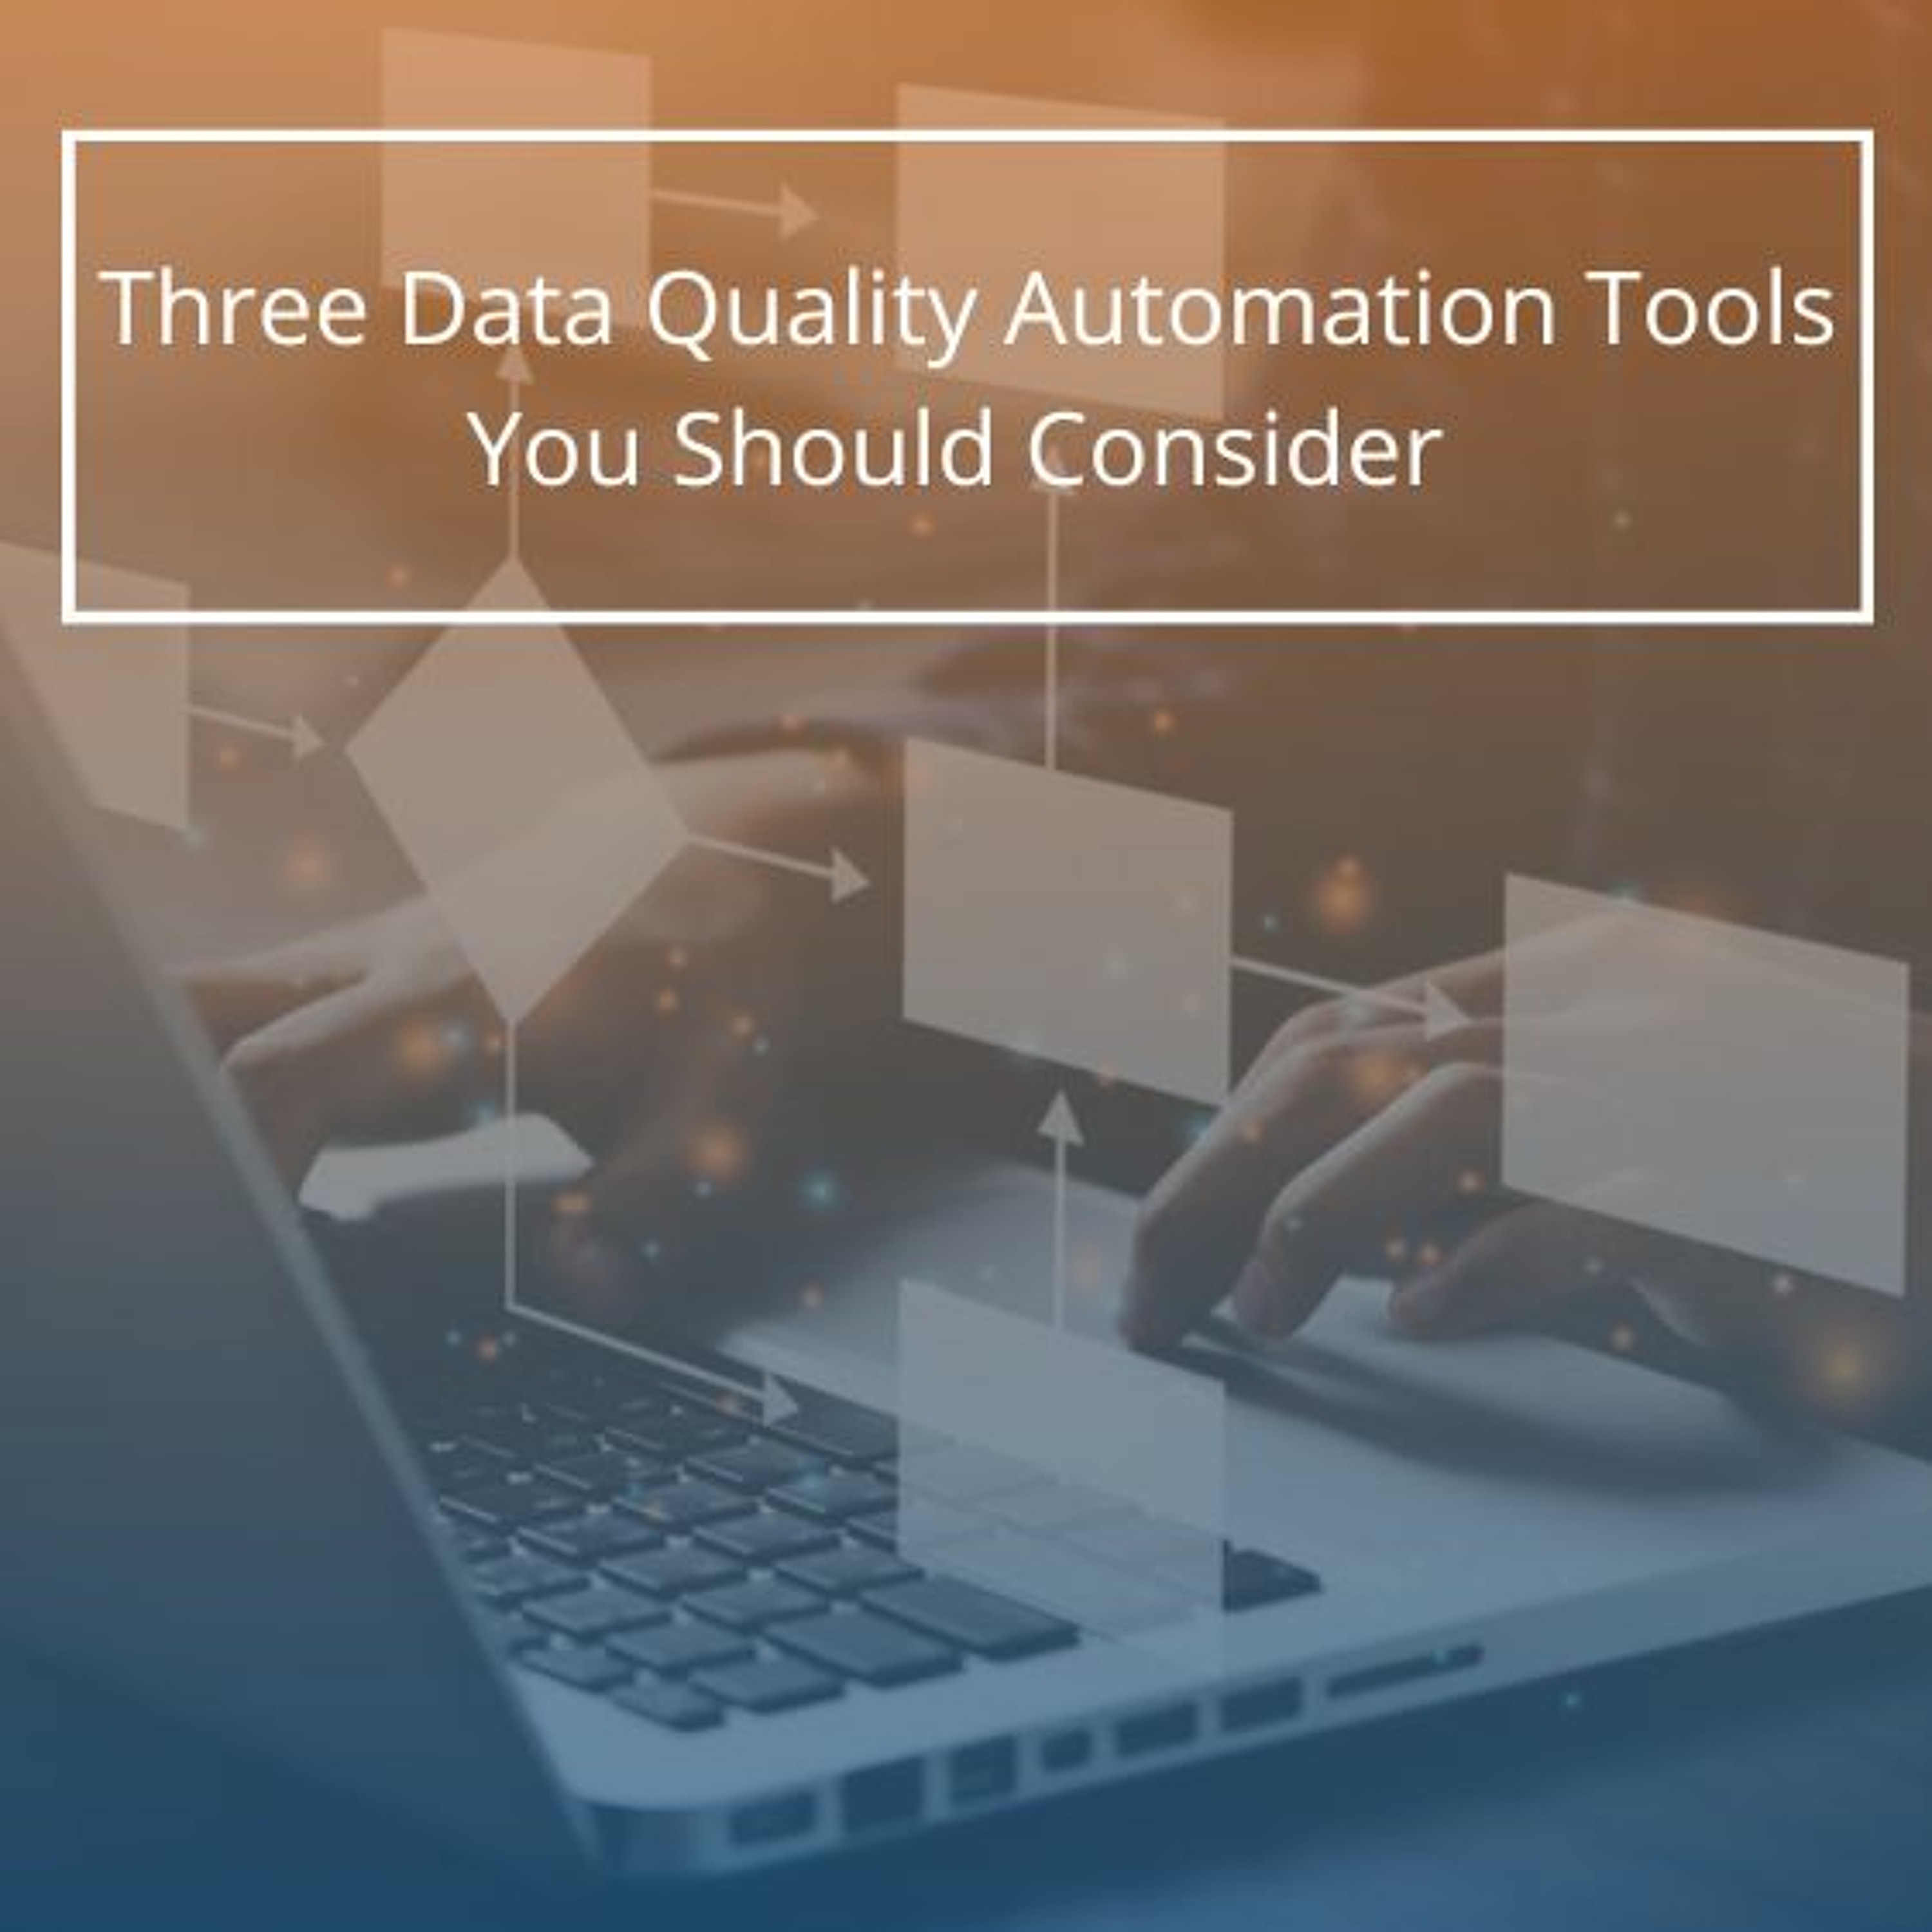 Three Data Quality Automation Tools You Should Consider